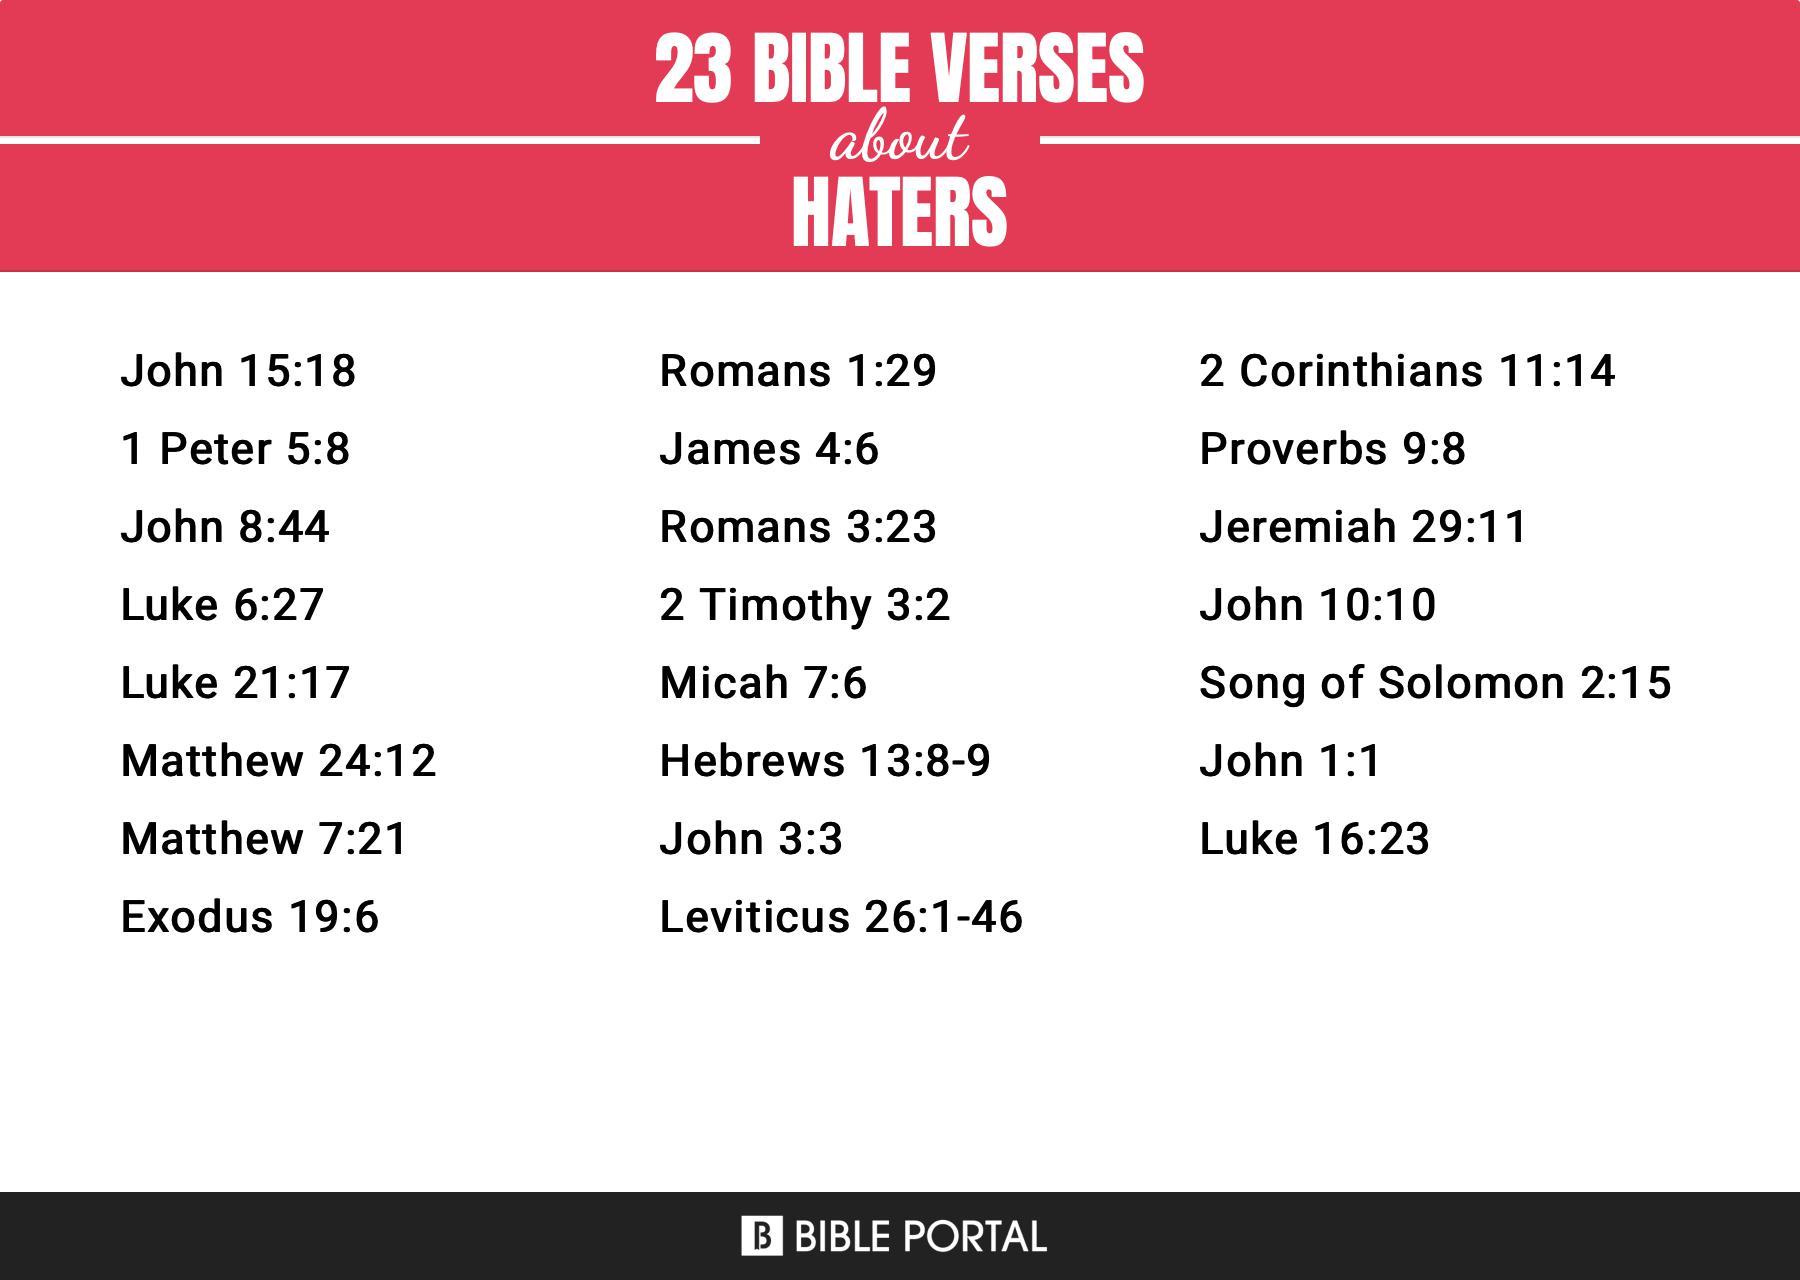 What Does the Bible Say about Haters?